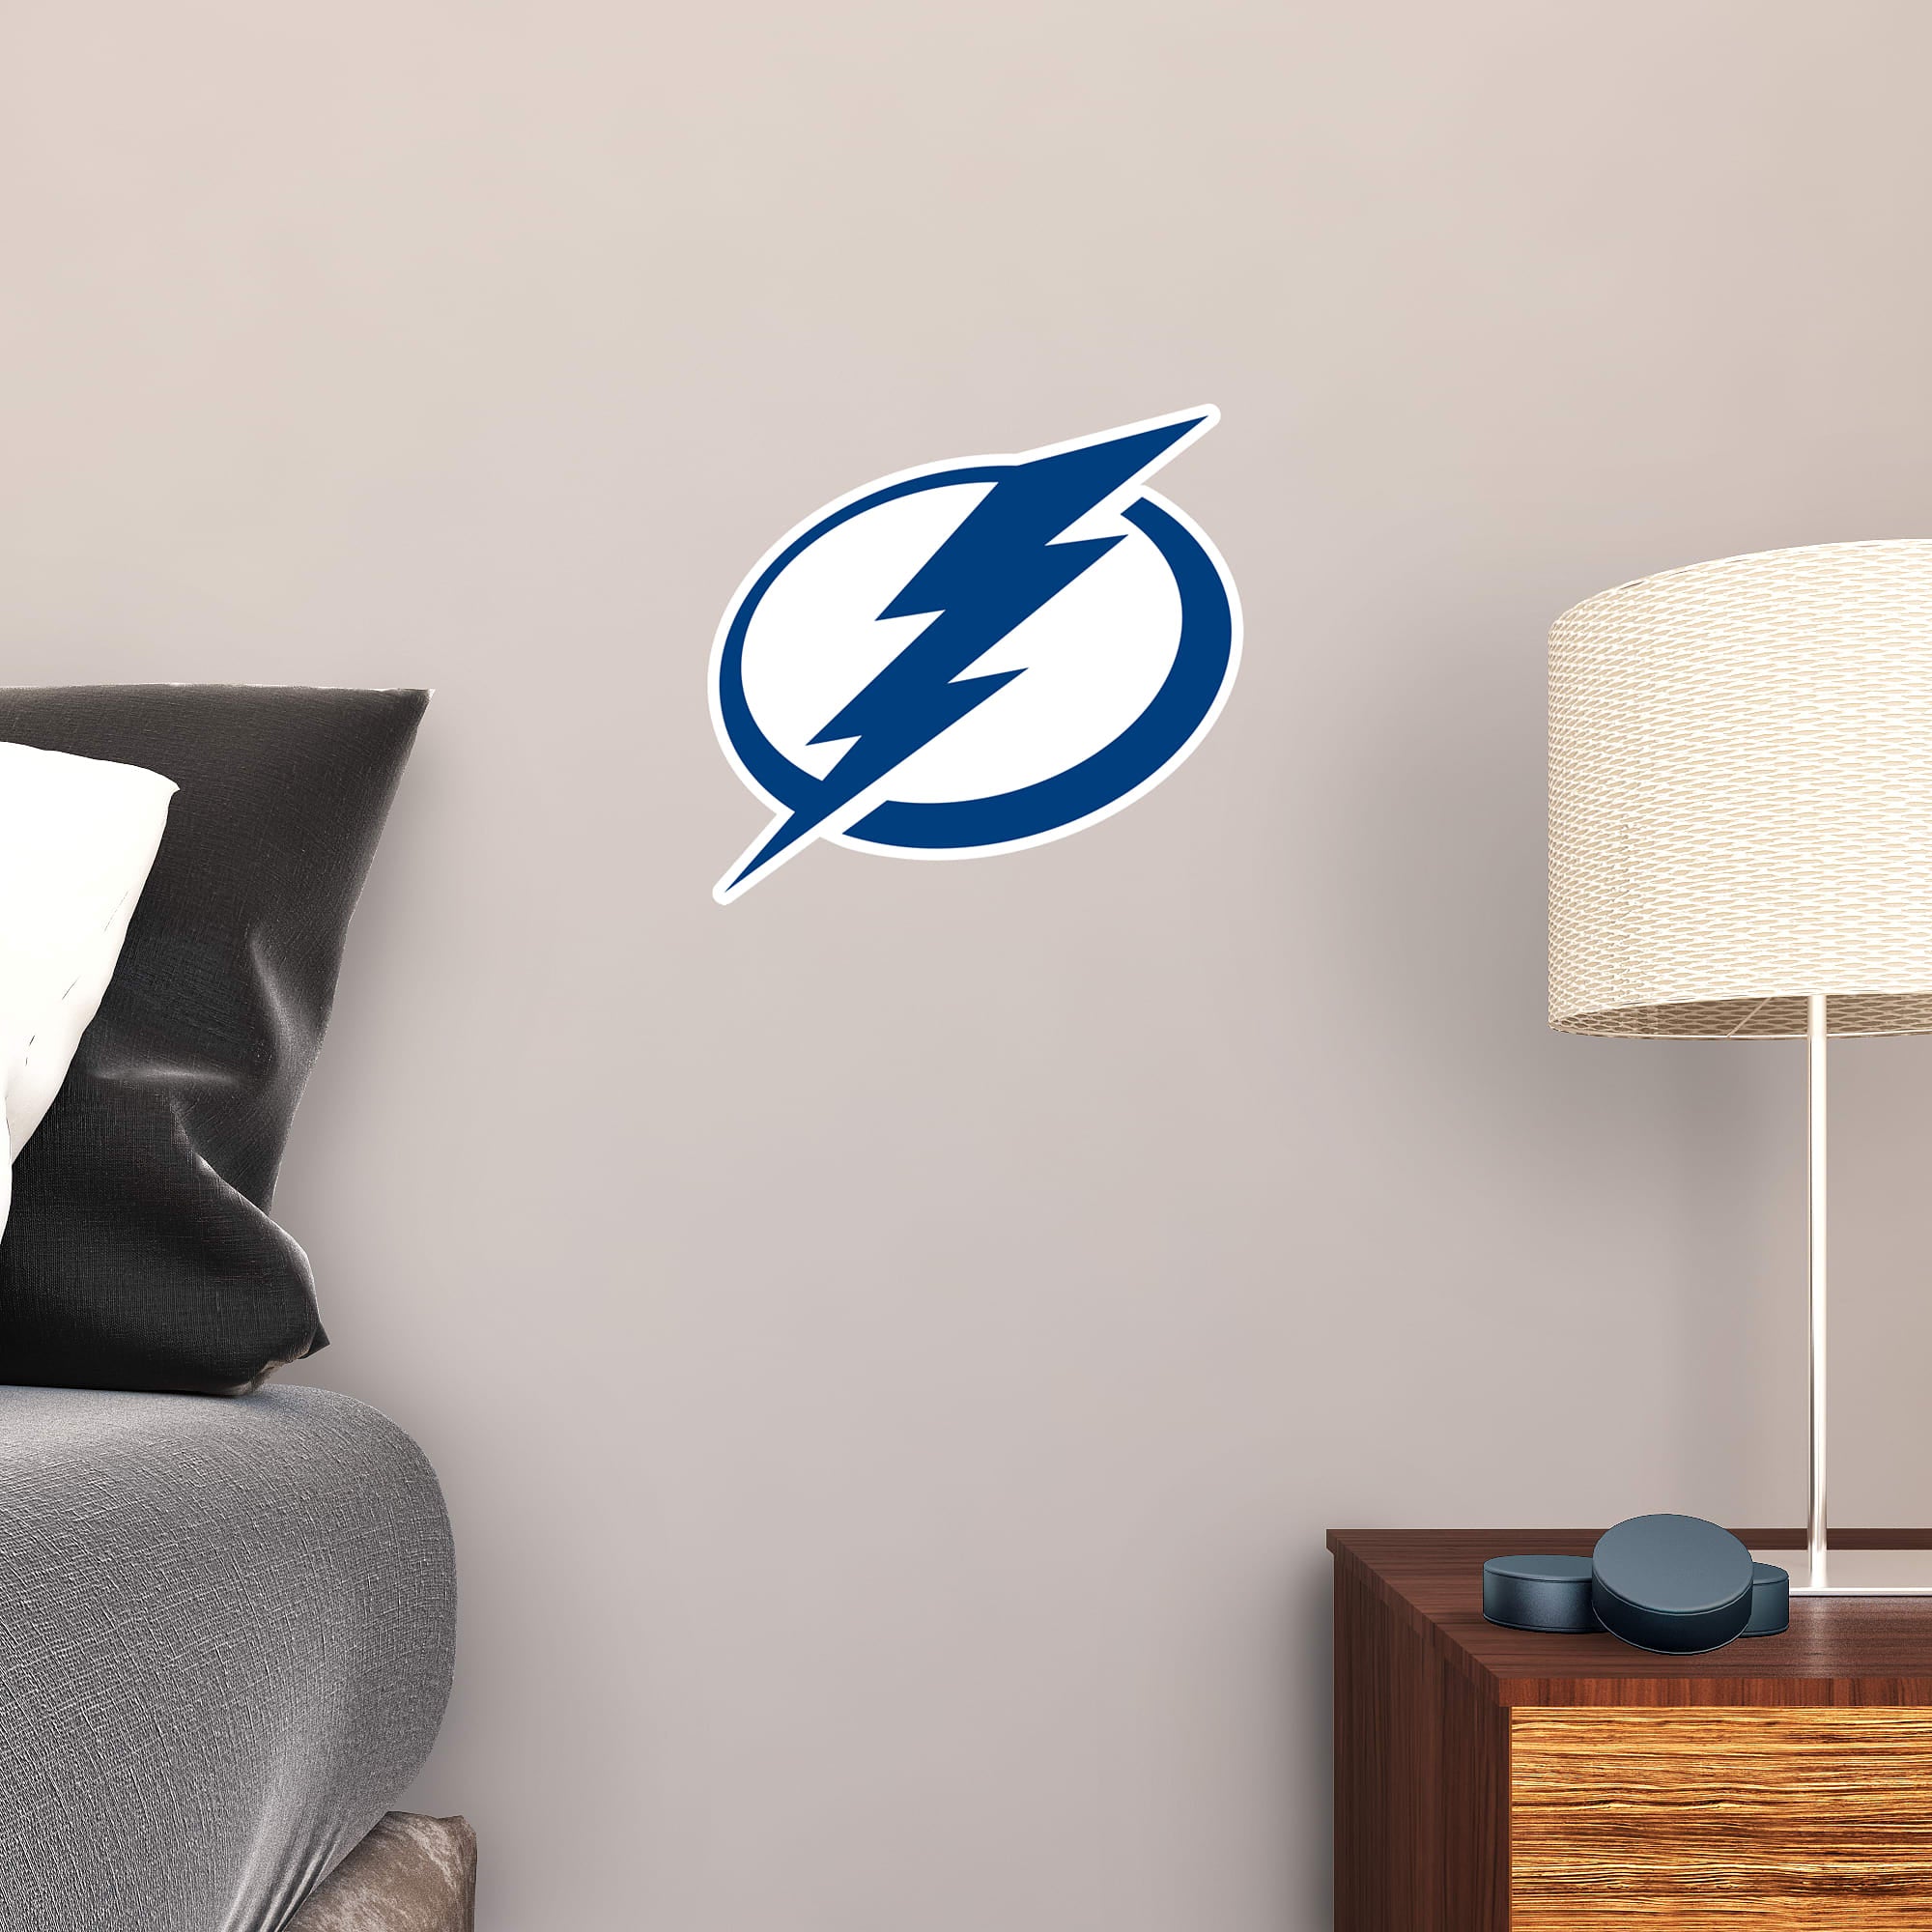 Tampa Bay Lightning: Logo - Officially Licensed NHL Removable Wall Decal Large by Fathead | Vinyl